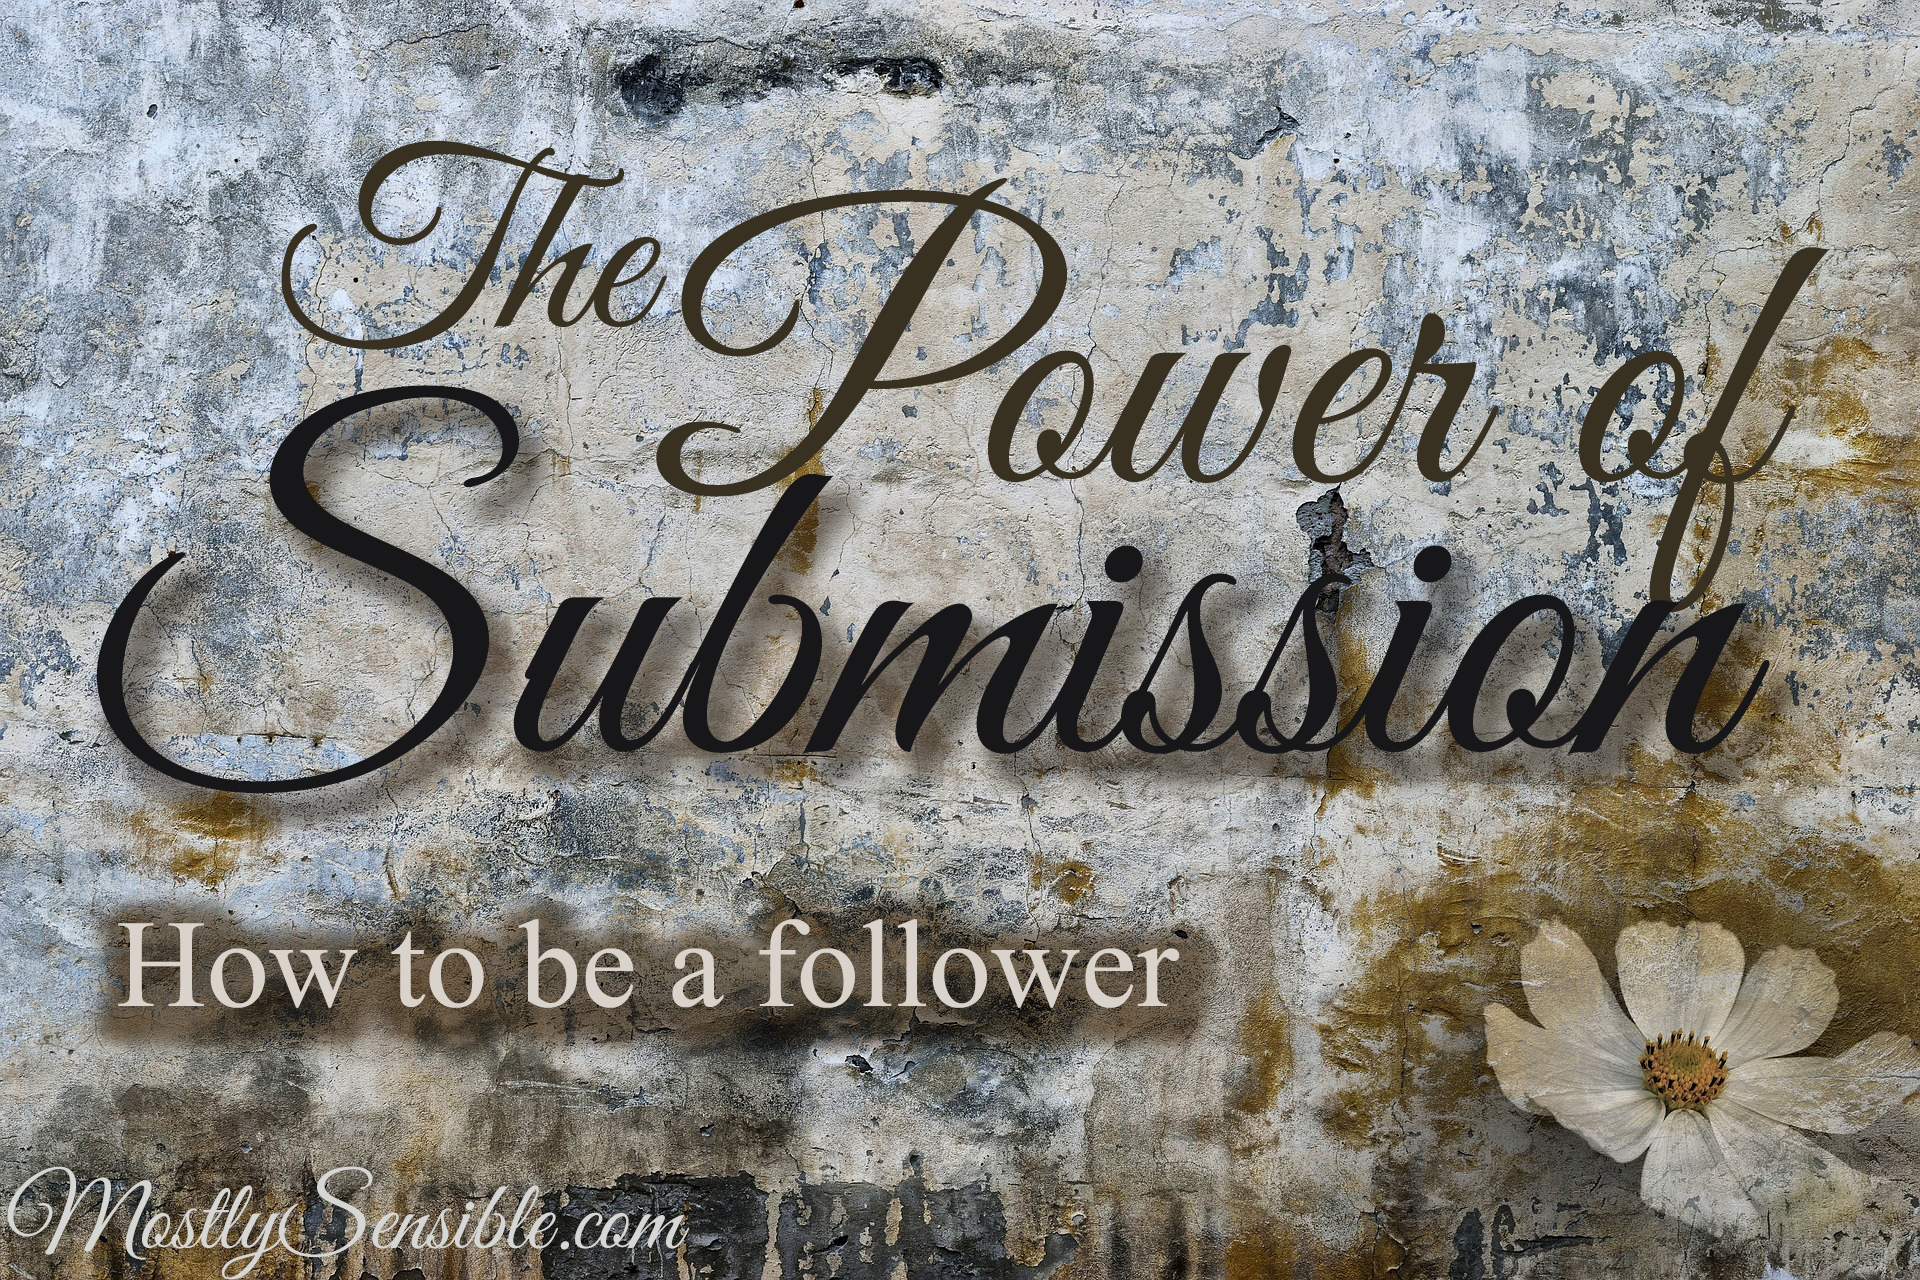 O The Power Of Submission